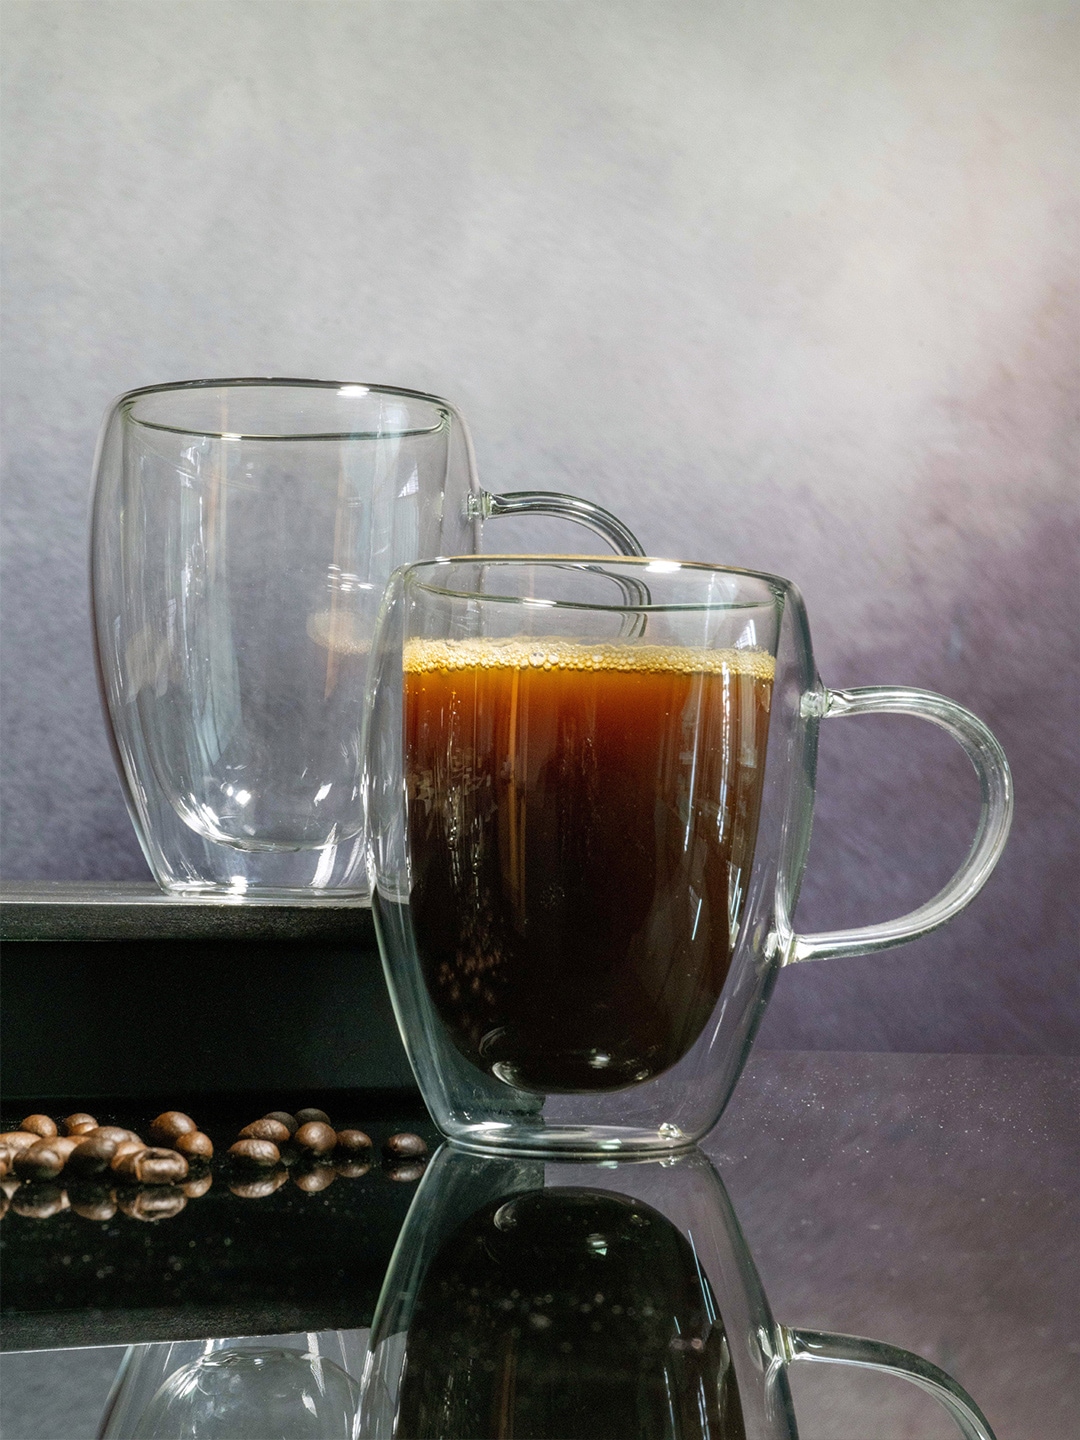 GOODHOMES Transparent Solid Glass Transparent Mugs Set of 2 Cups and Mugs Price in India